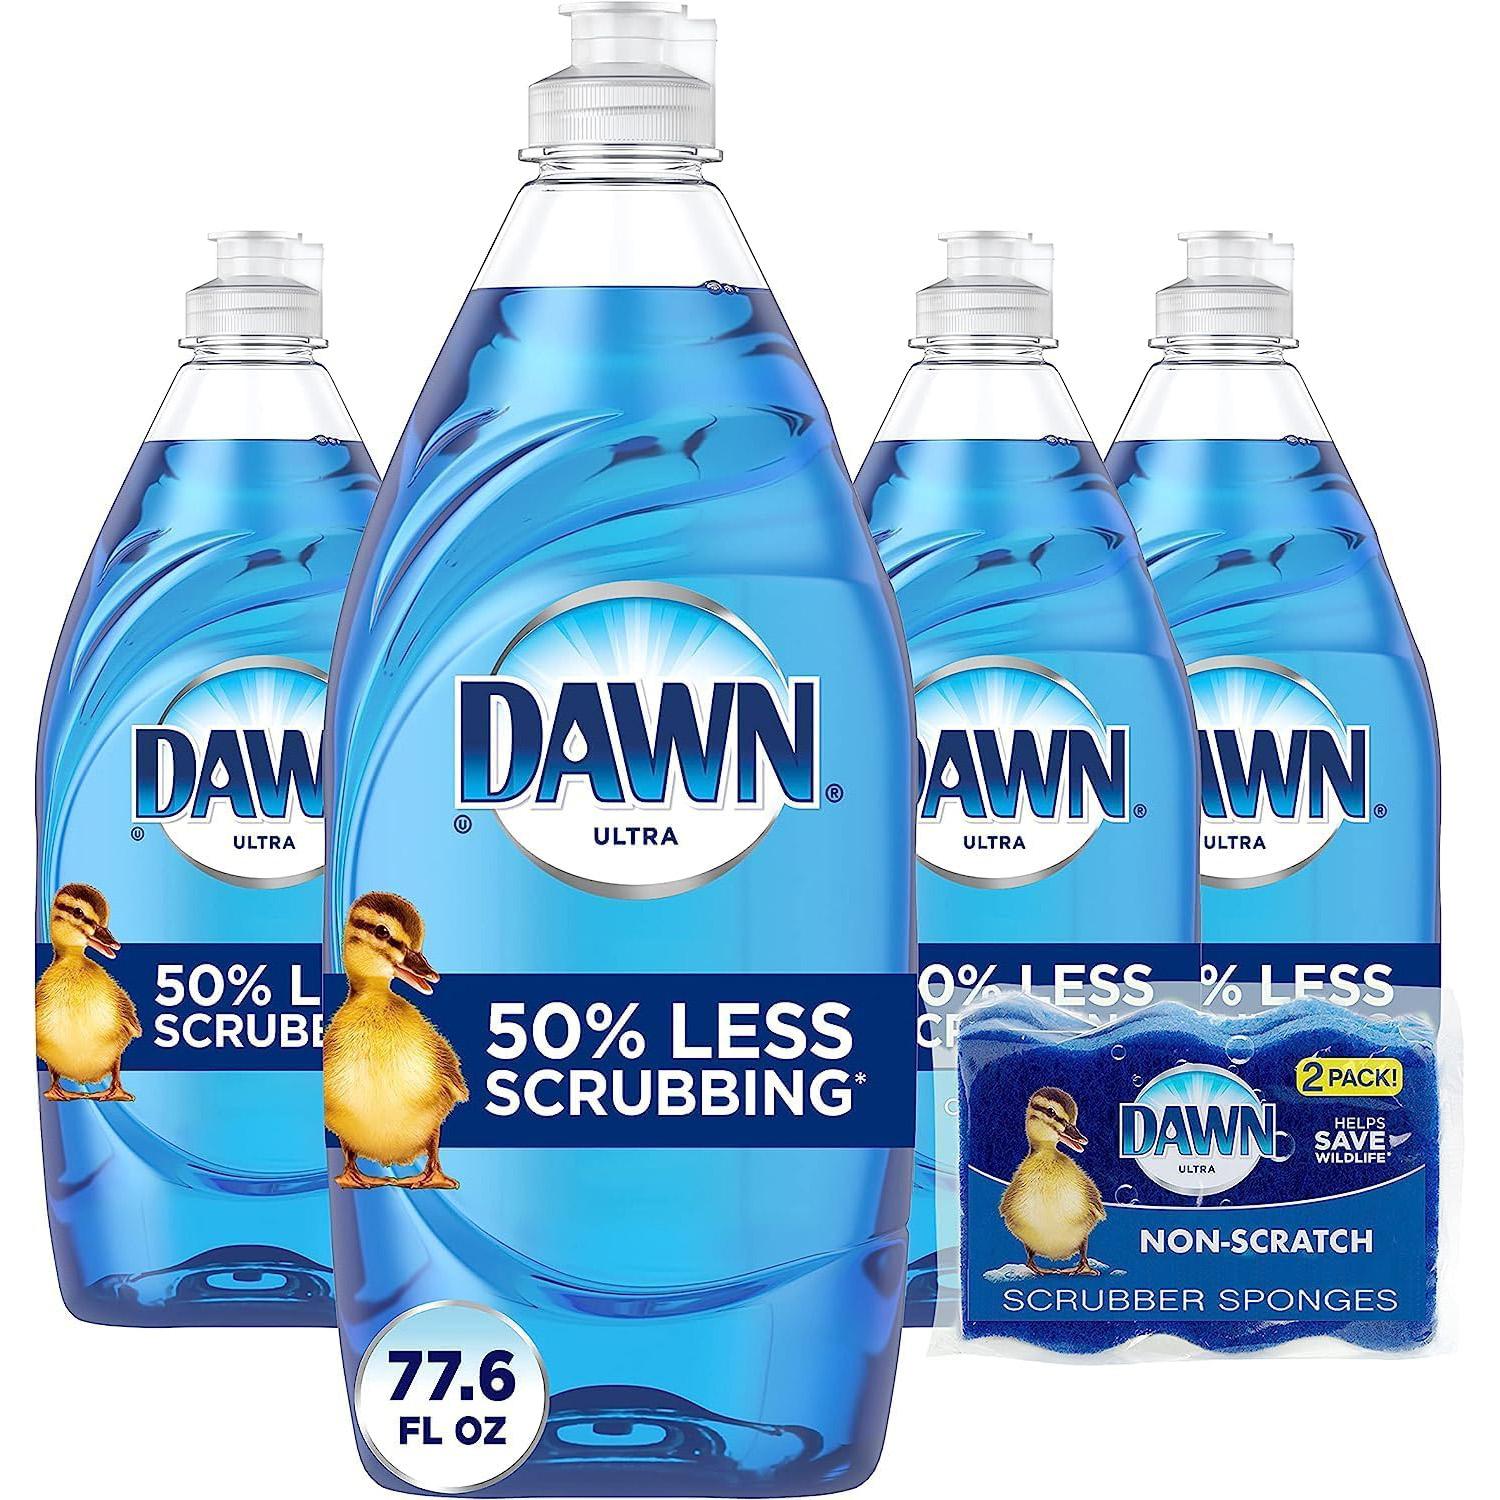 Dawn Ultra Dish Soaps 4 Pack + 2 Sponges for $11.60 Shipped